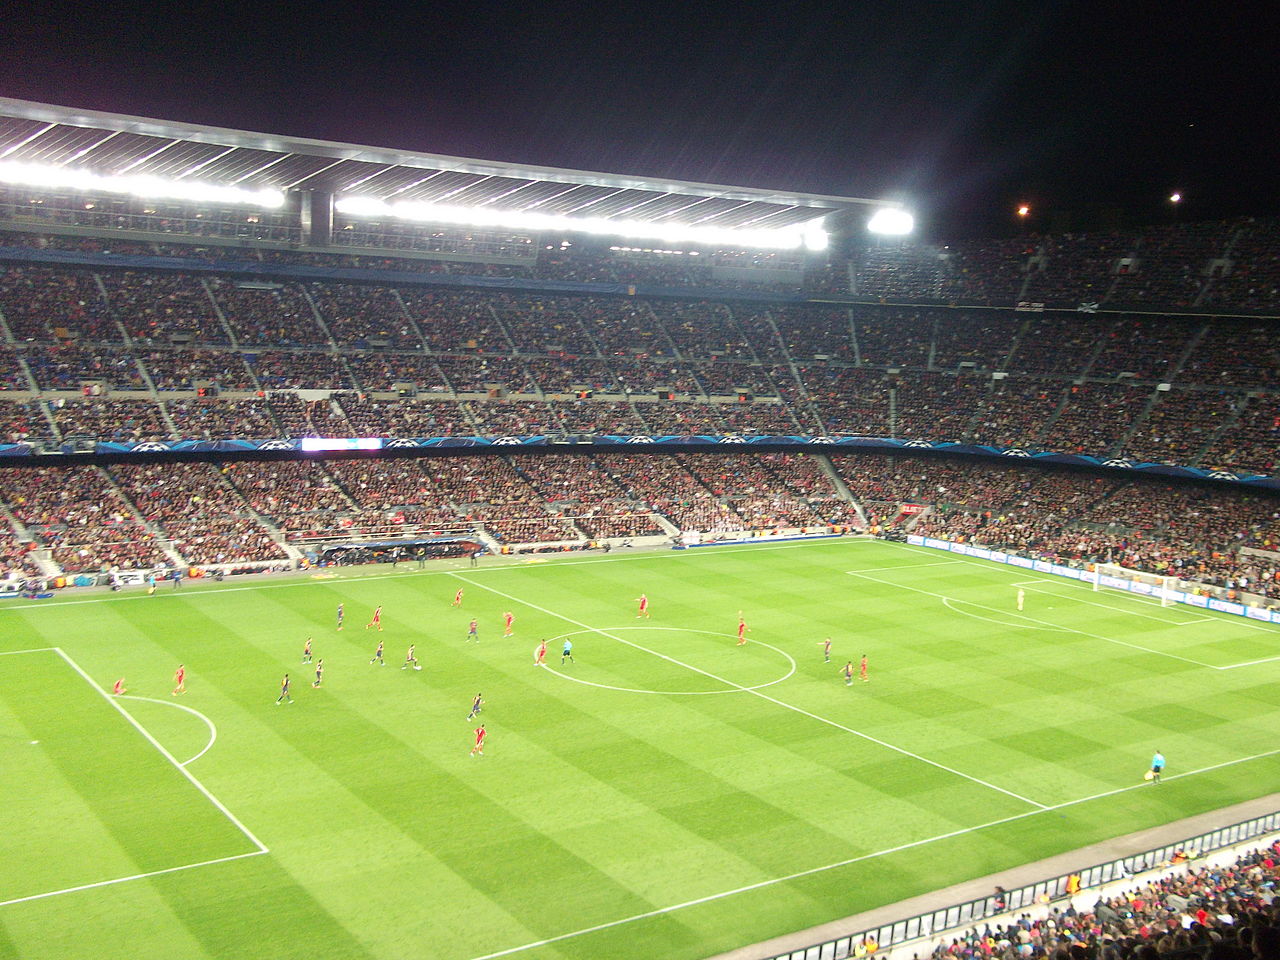 20 largest soccer stadiums of the world